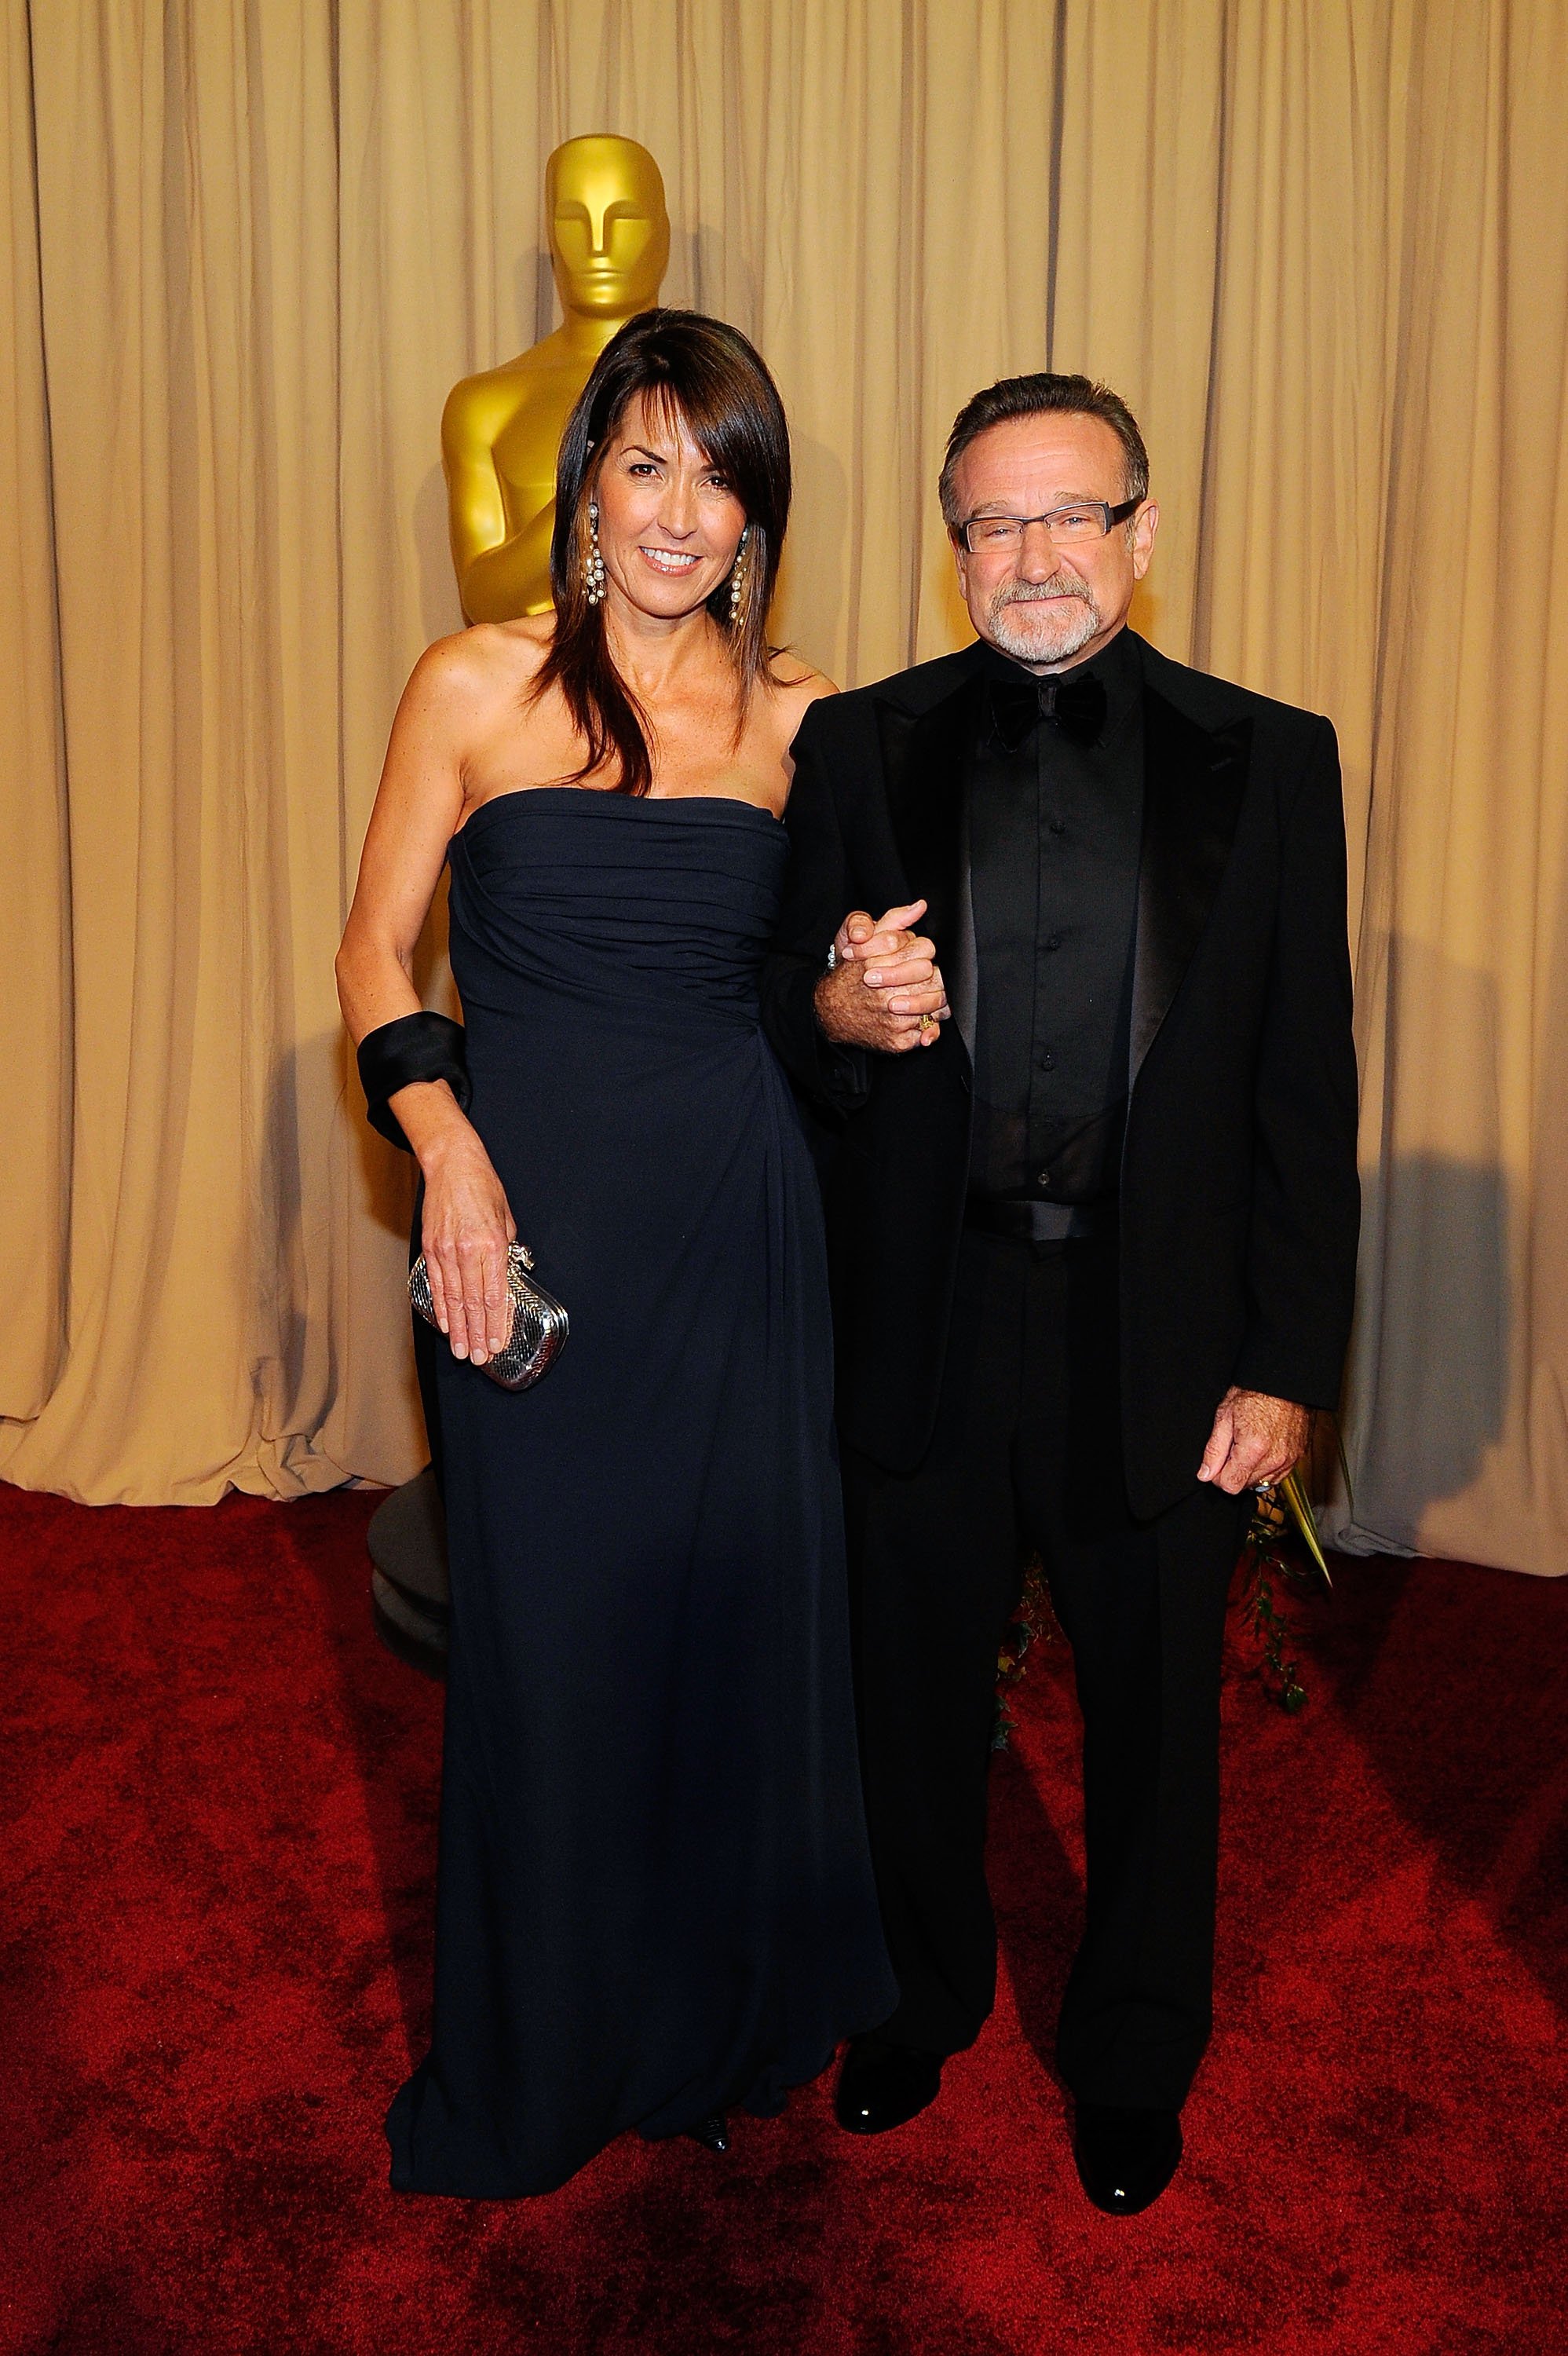 Robin Williams and Susan Schneider arrive backstage at the 82nd Annual Academy Awards held at Kodak Theatre on March 7, 2010 in Hollywood, California. | Source: Getty Images 